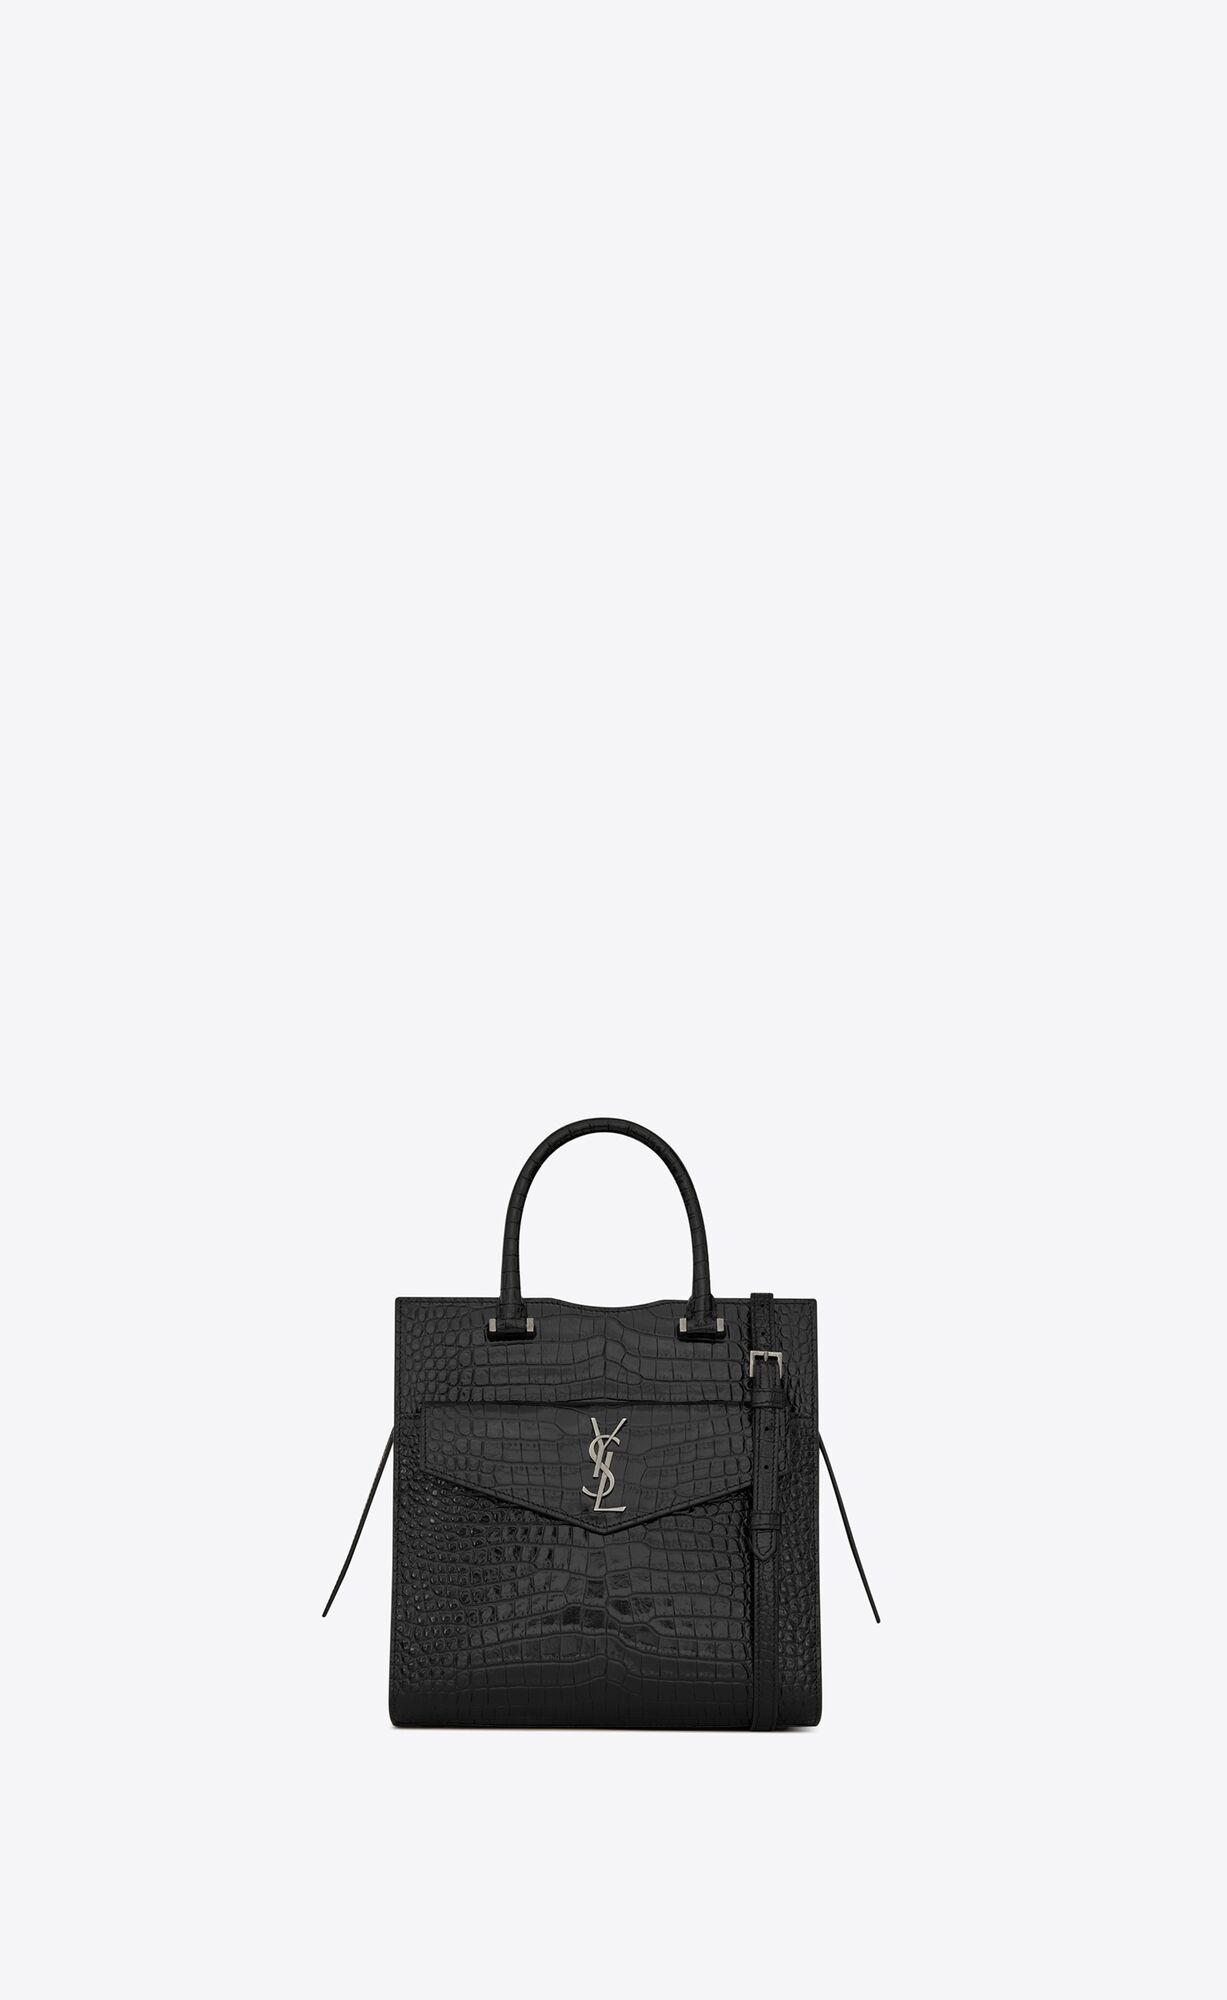 UPTOWN Small tote in shiny crocodile-embossed leather | Saint Laurent ...